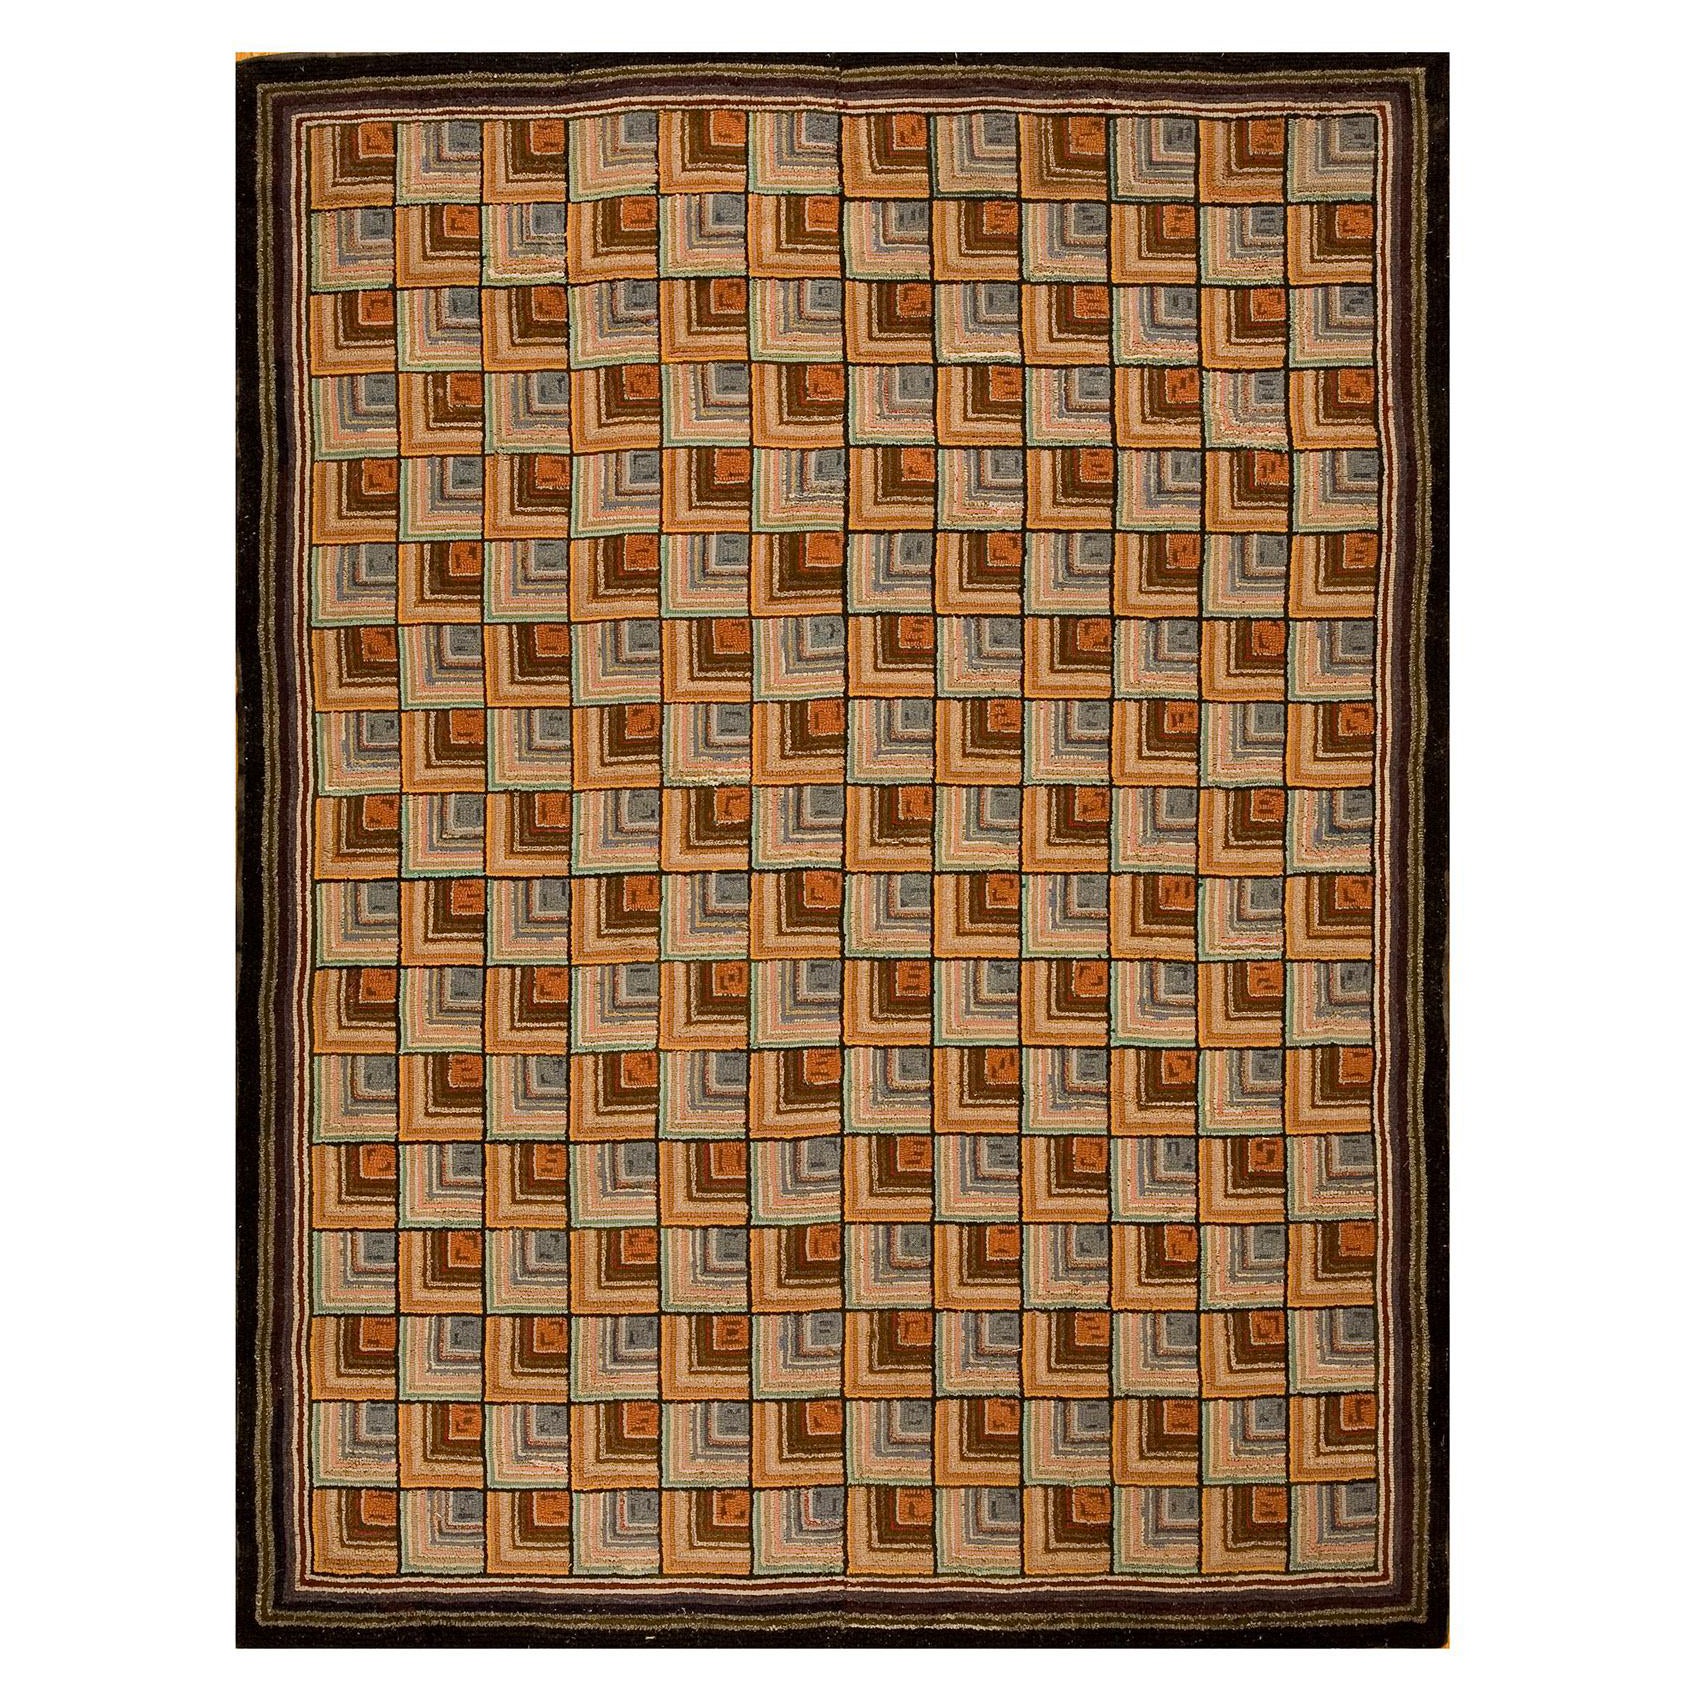 Early 20th Century American Hooked Rug ( 6'3" x 7'8" - 190 x 262 ) For Sale